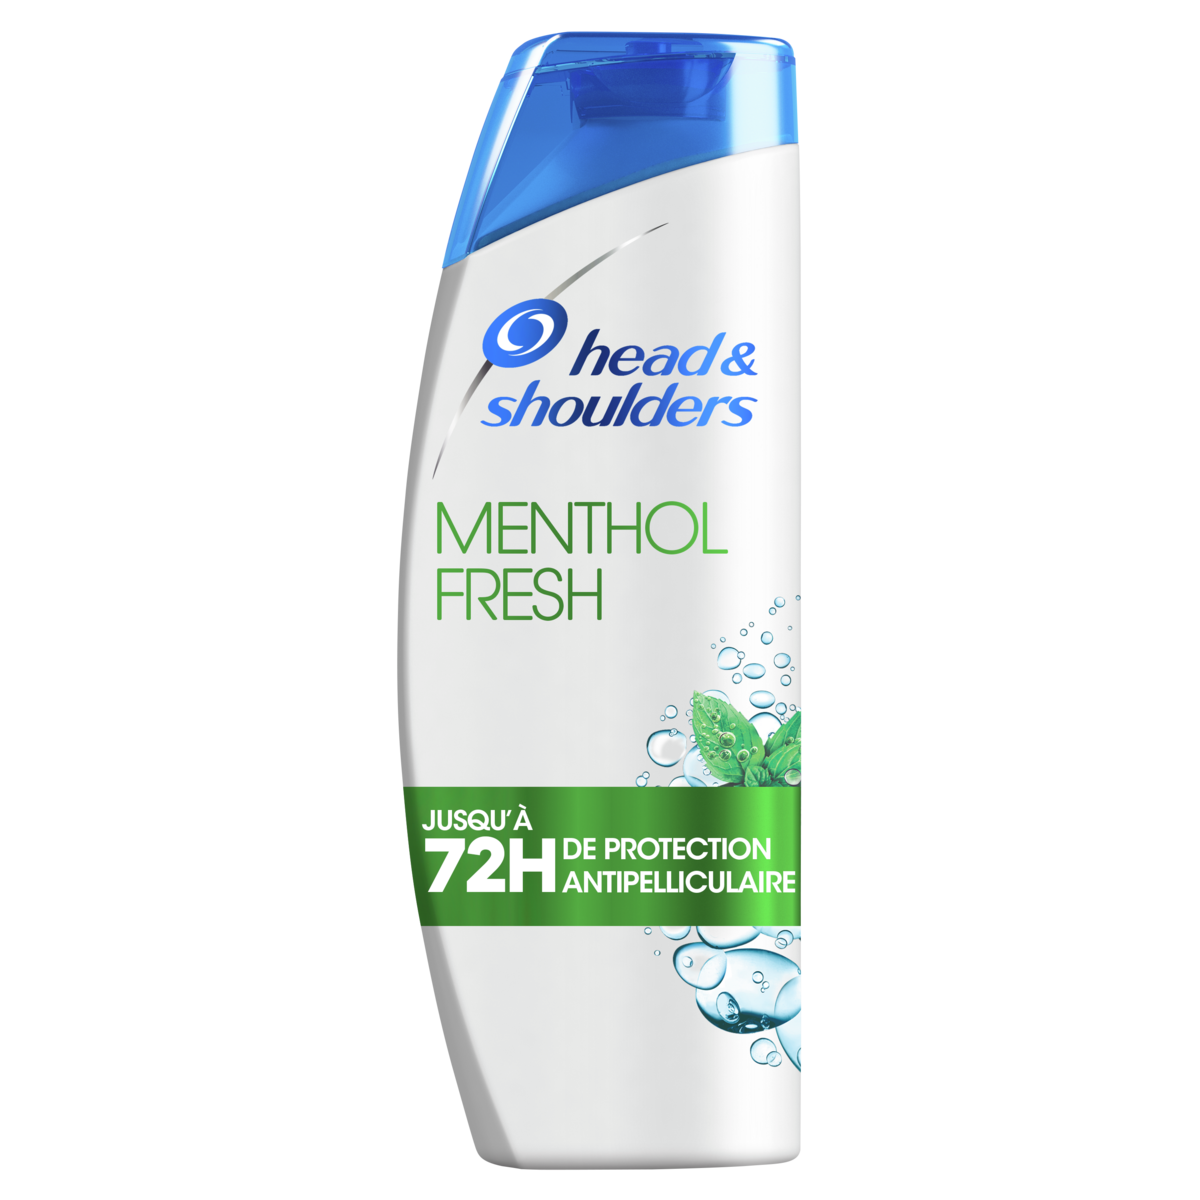 HEAD & SHOULDERS Menthol fresh shampooing anti pelliculaire 72h 285ml